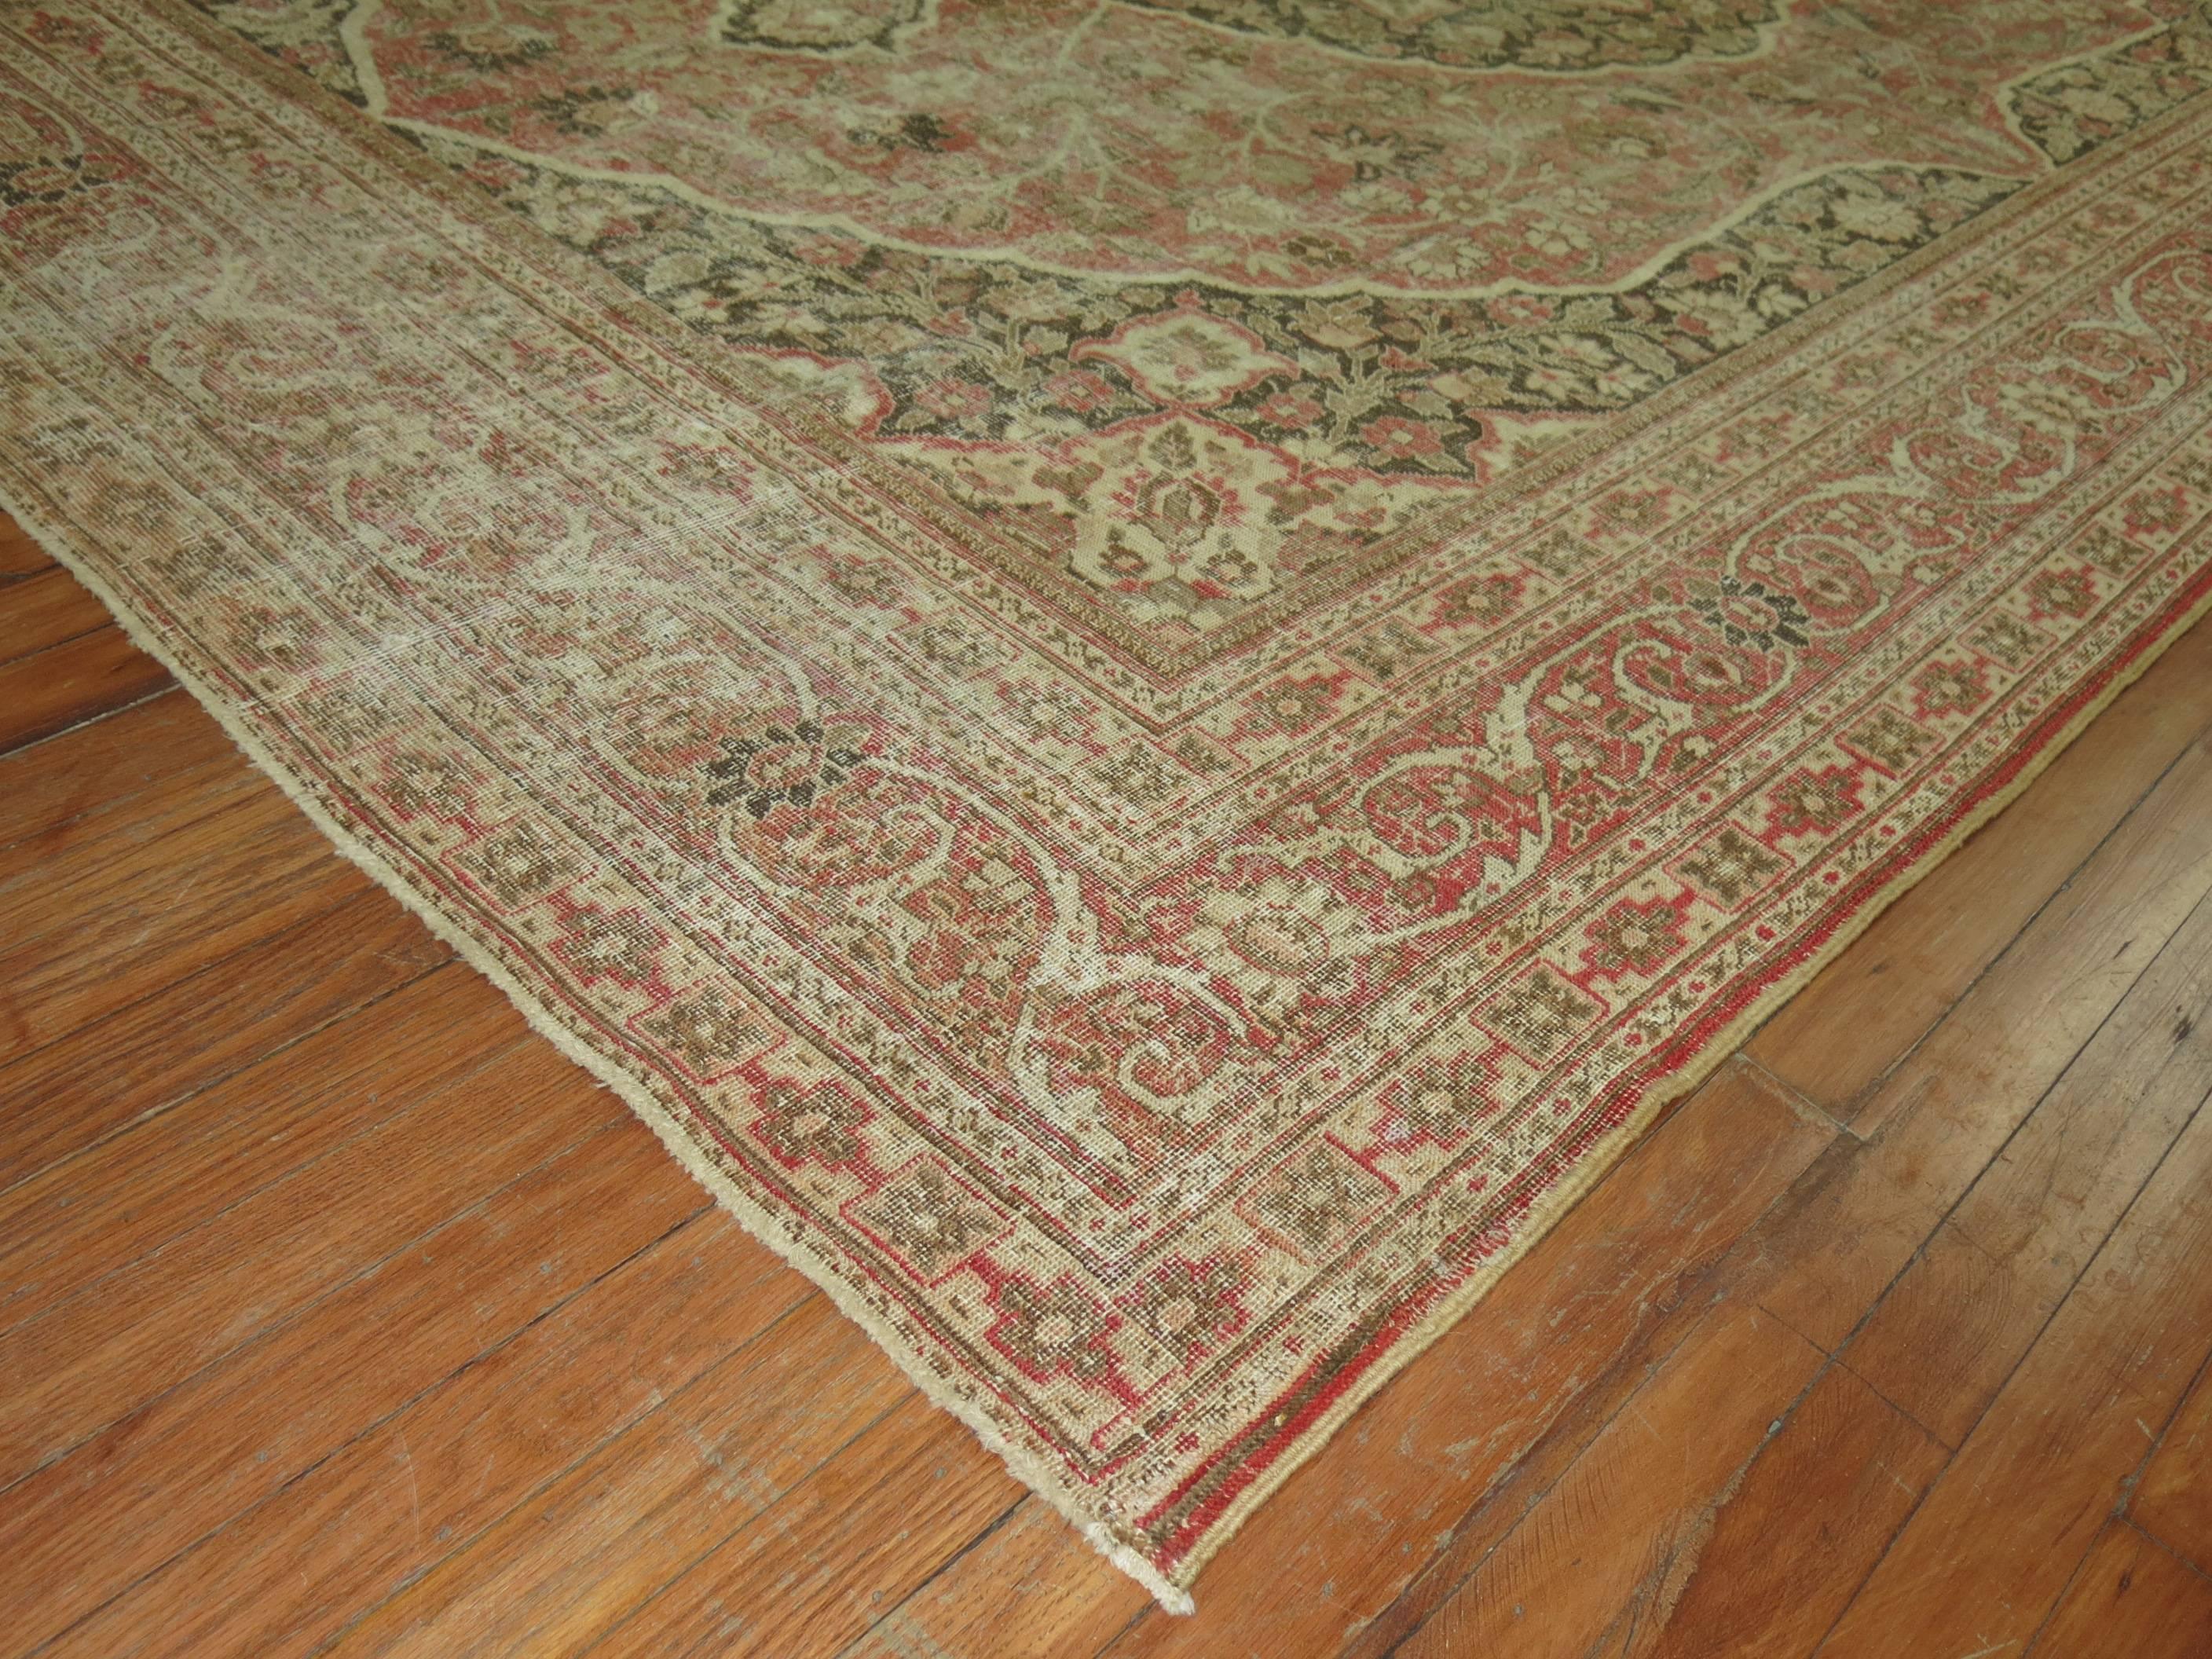 An early 20th century Classic formal style Persian Tabriz rug.

7'6'' x 10'8''